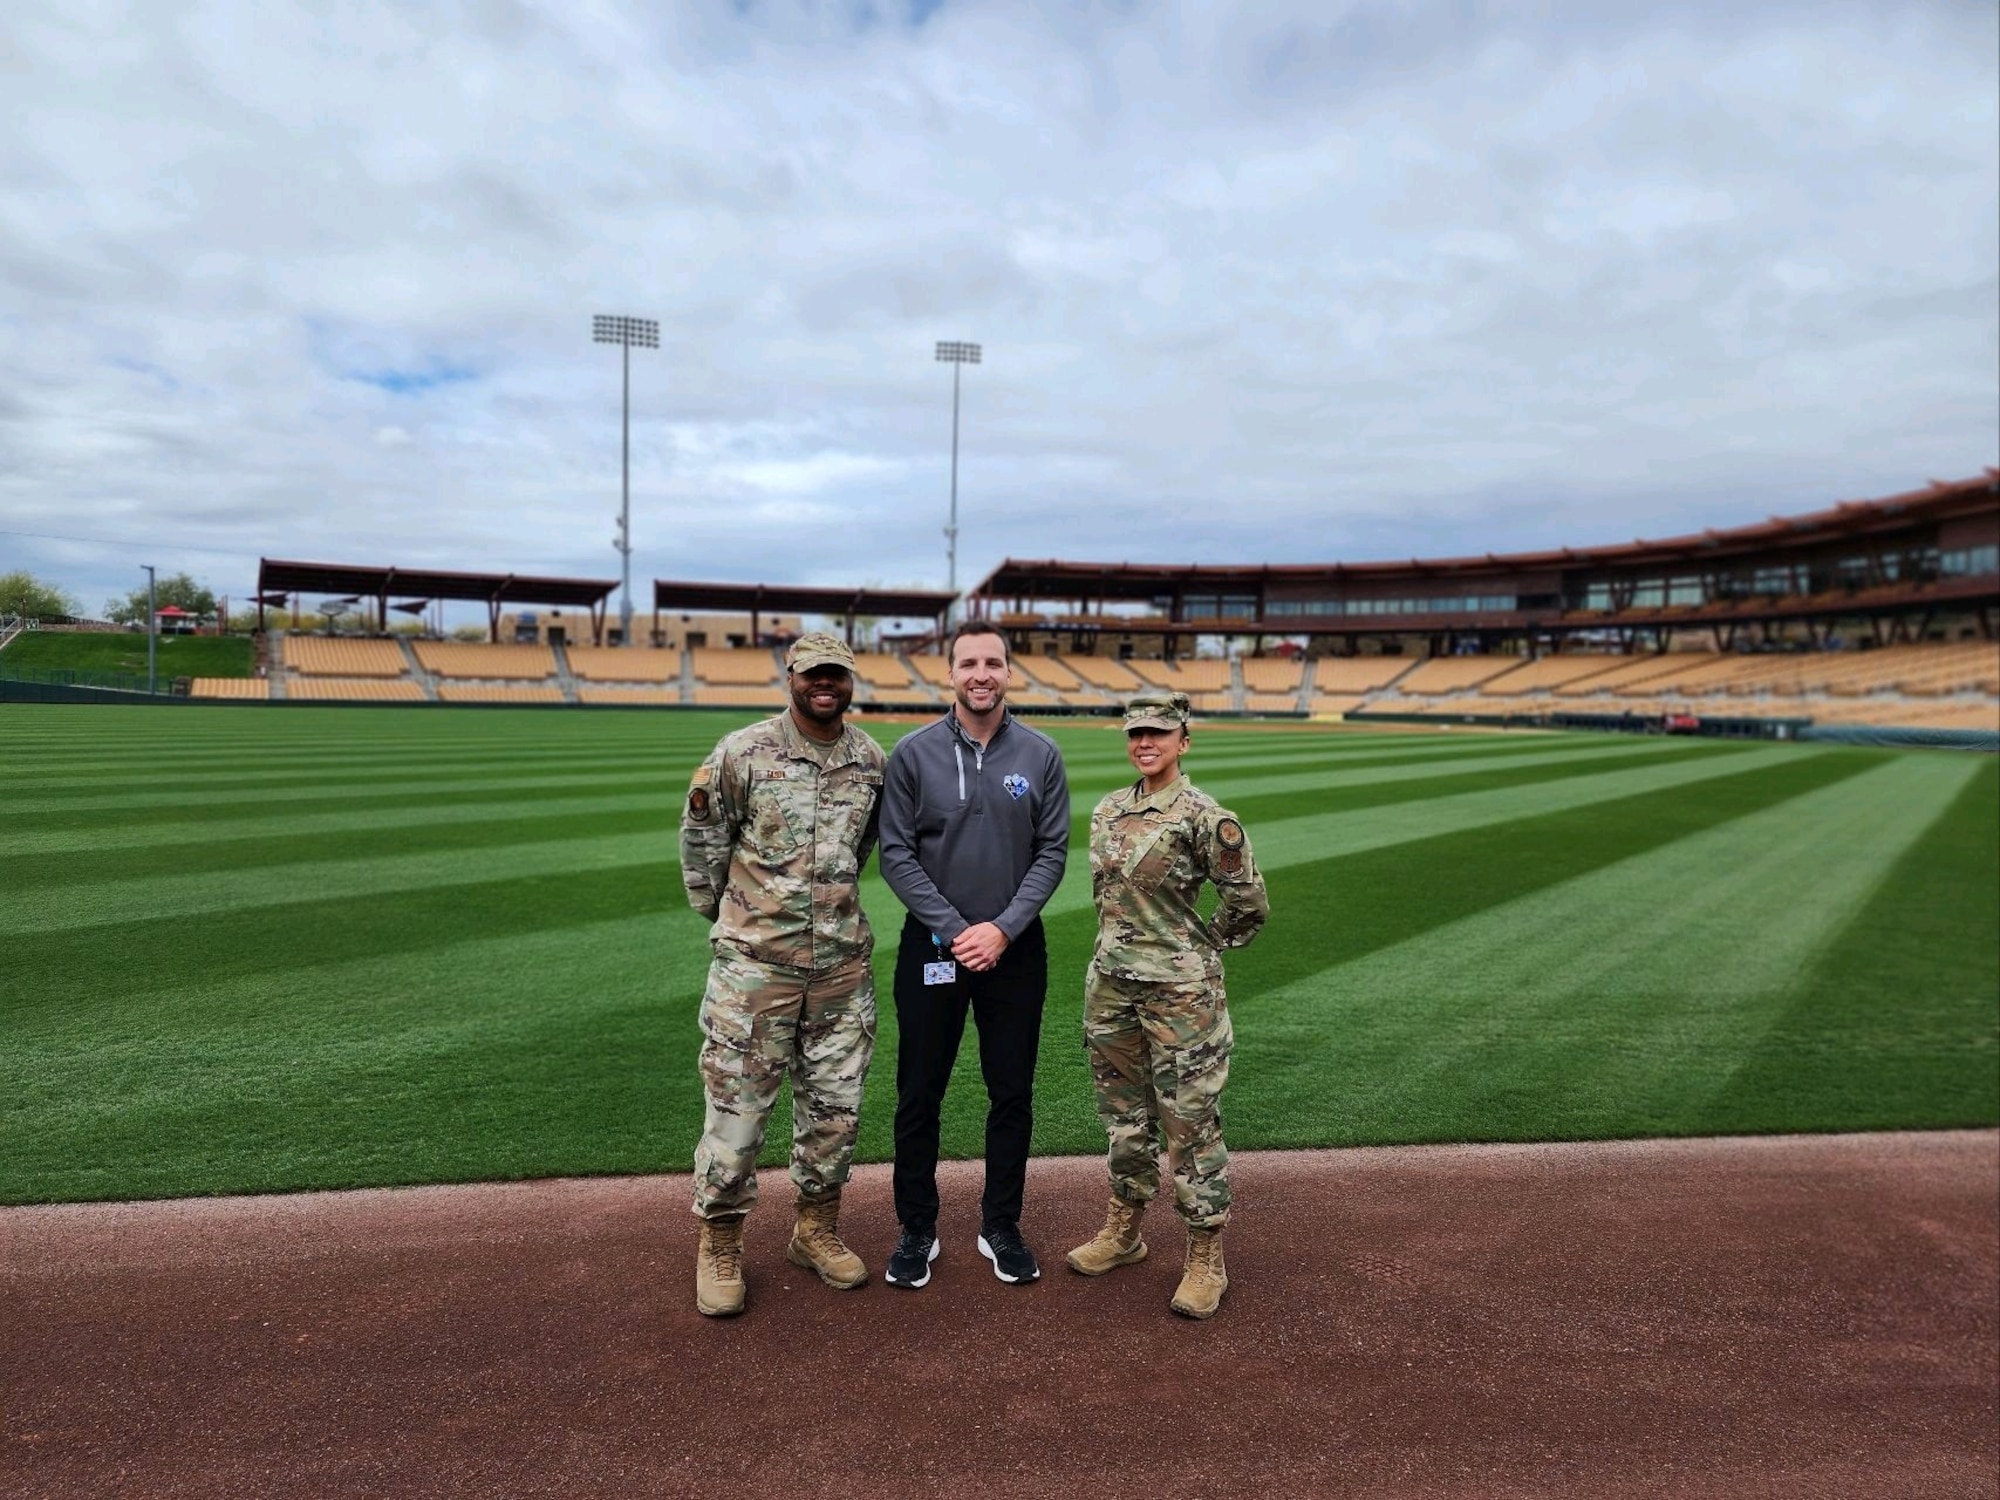 Dave Schermerhorn (middle) director, marketing, and corporate partnerships at Camelback Ranch–Glendale baseball complex, poses for a photo with Tech. Sgts. Anna Solis and Tech. Sgt. Glen Eason, production recruiters with the Arizona Air National Guard, in front of the Air National Guard outfield banner at Camelback Ranch–Glendale baseball complex in Phoenix, AZ. March 1, 2023.